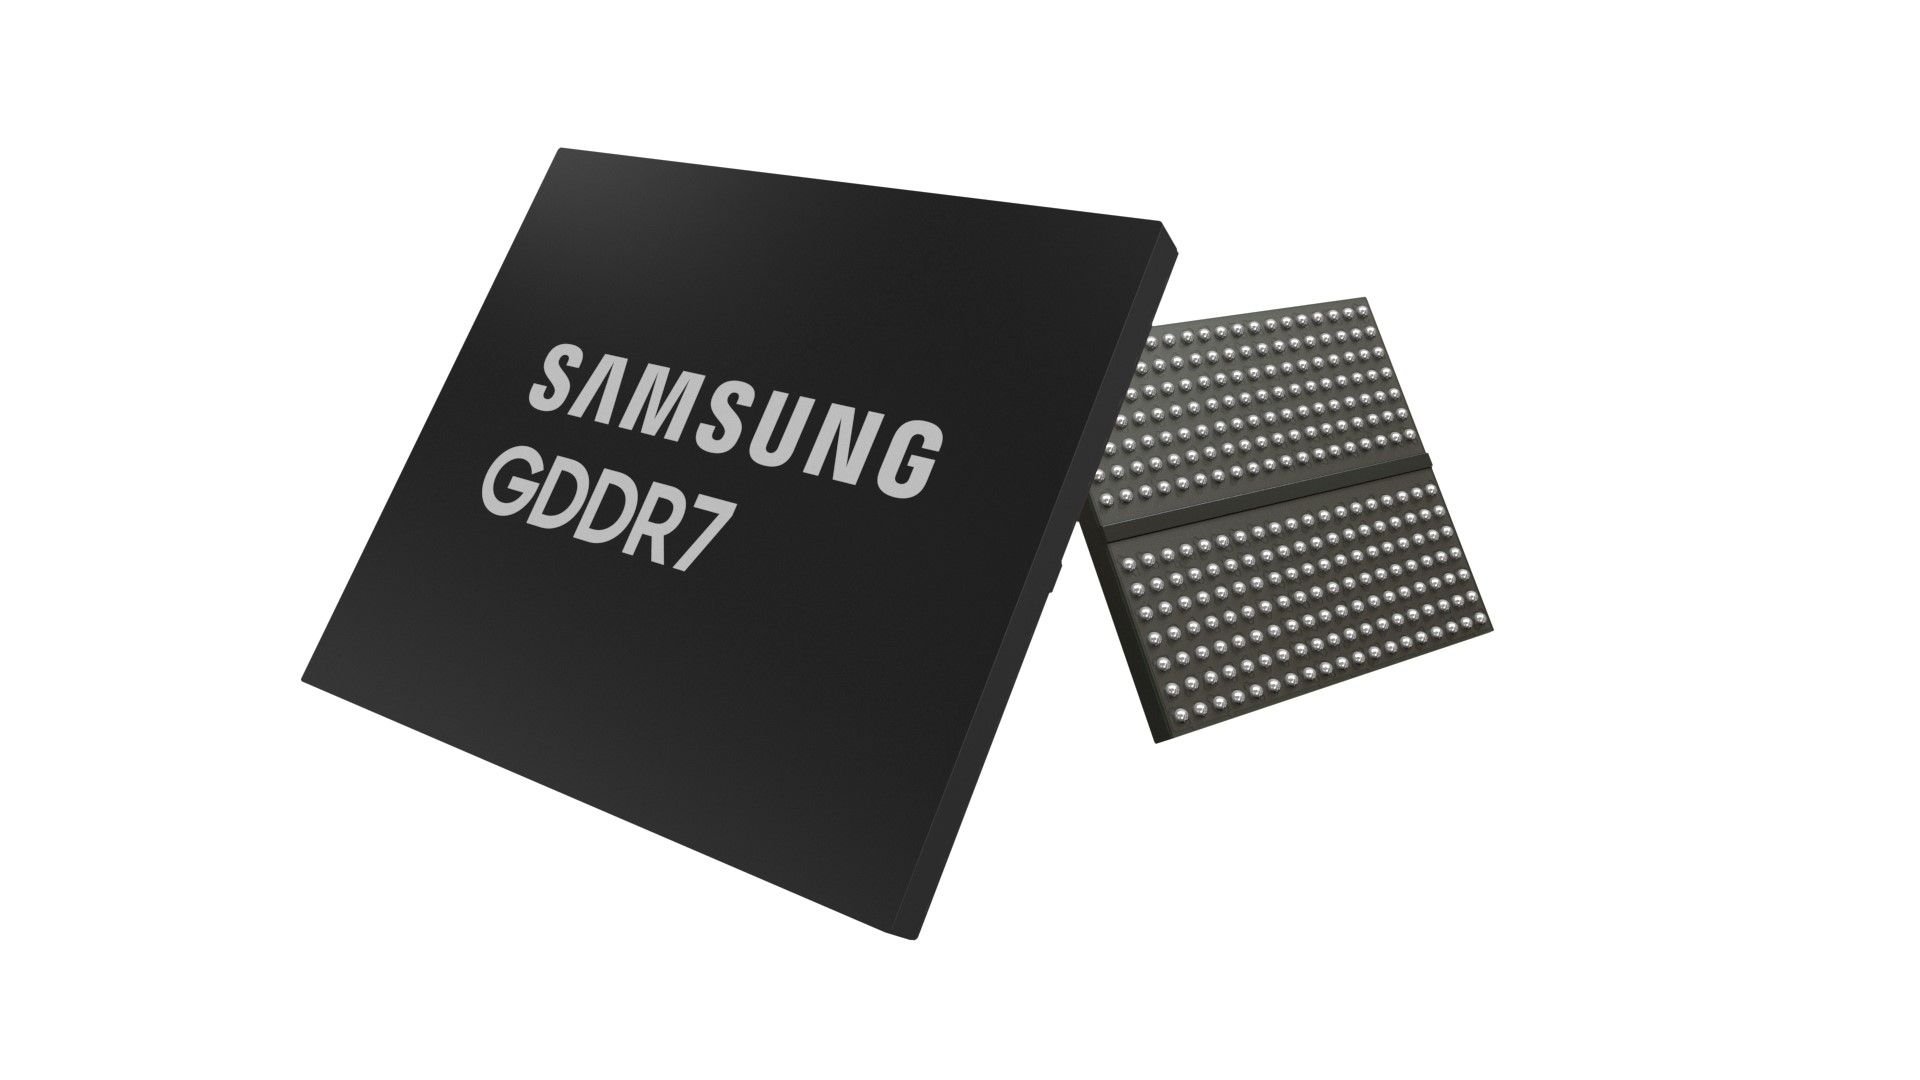 Samsung is Launching Ultra-Fast GDDR7 Graphics Memory